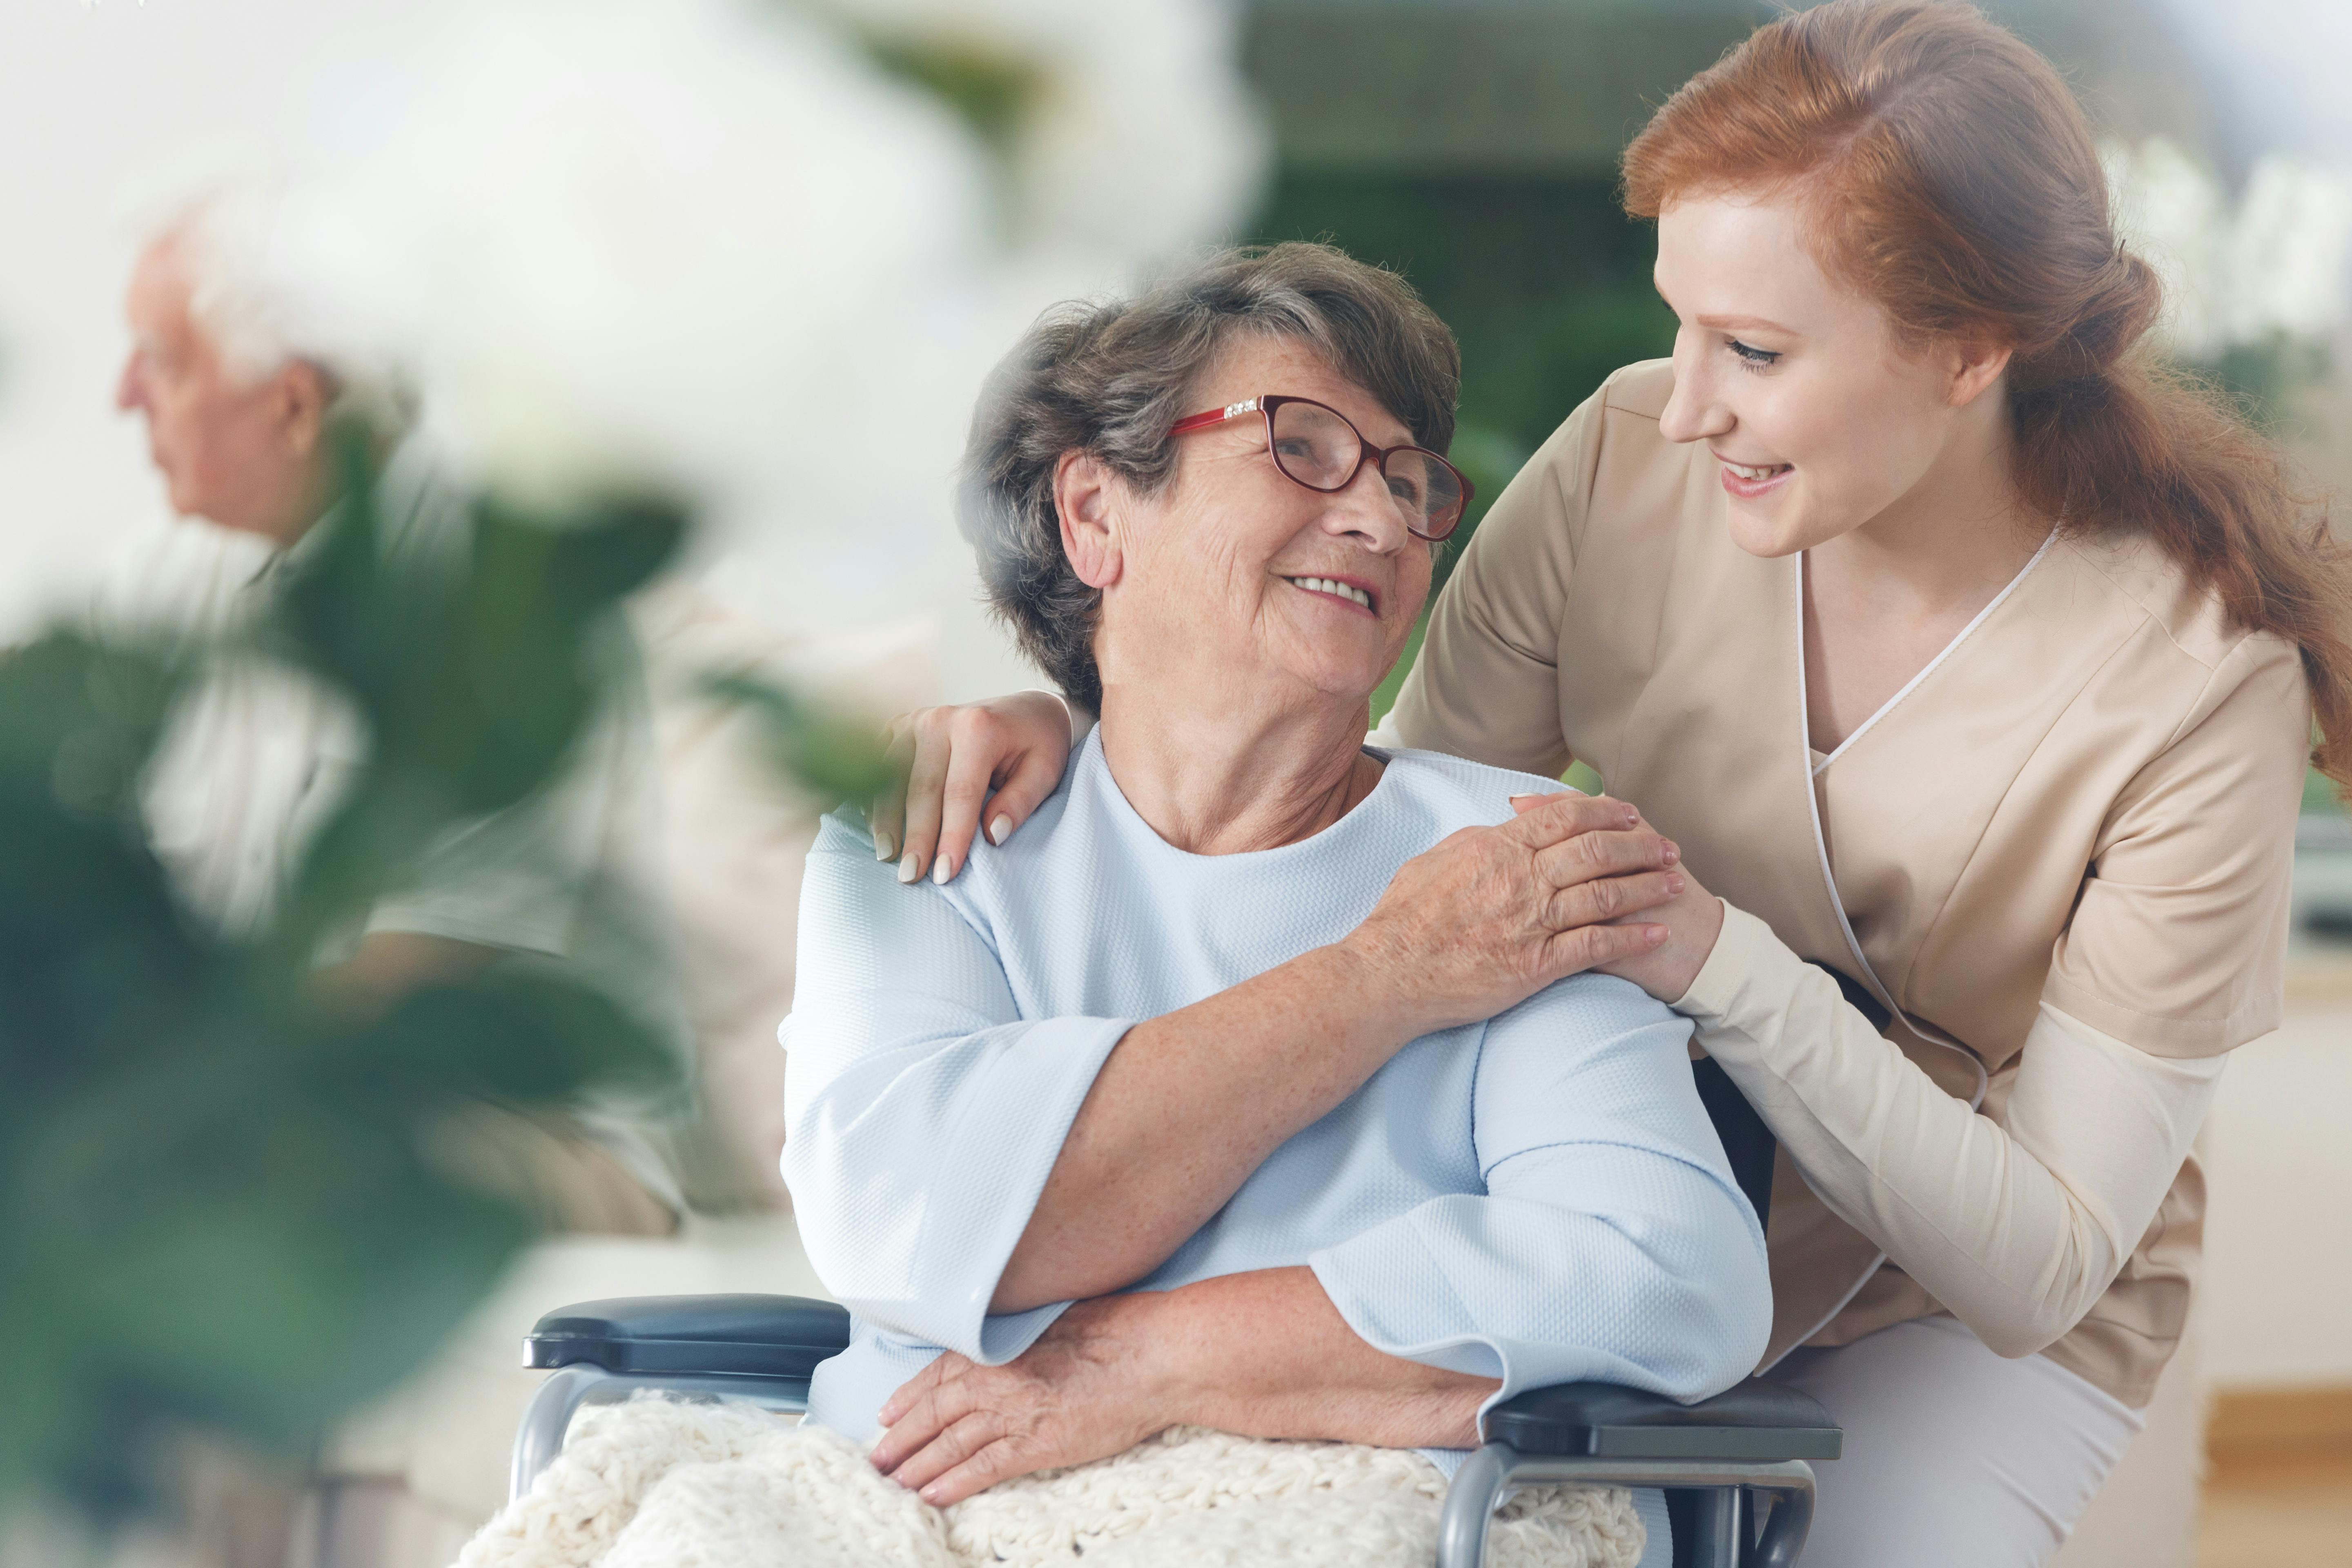 Caregiver Vs. Caretaker: What's the Difference?